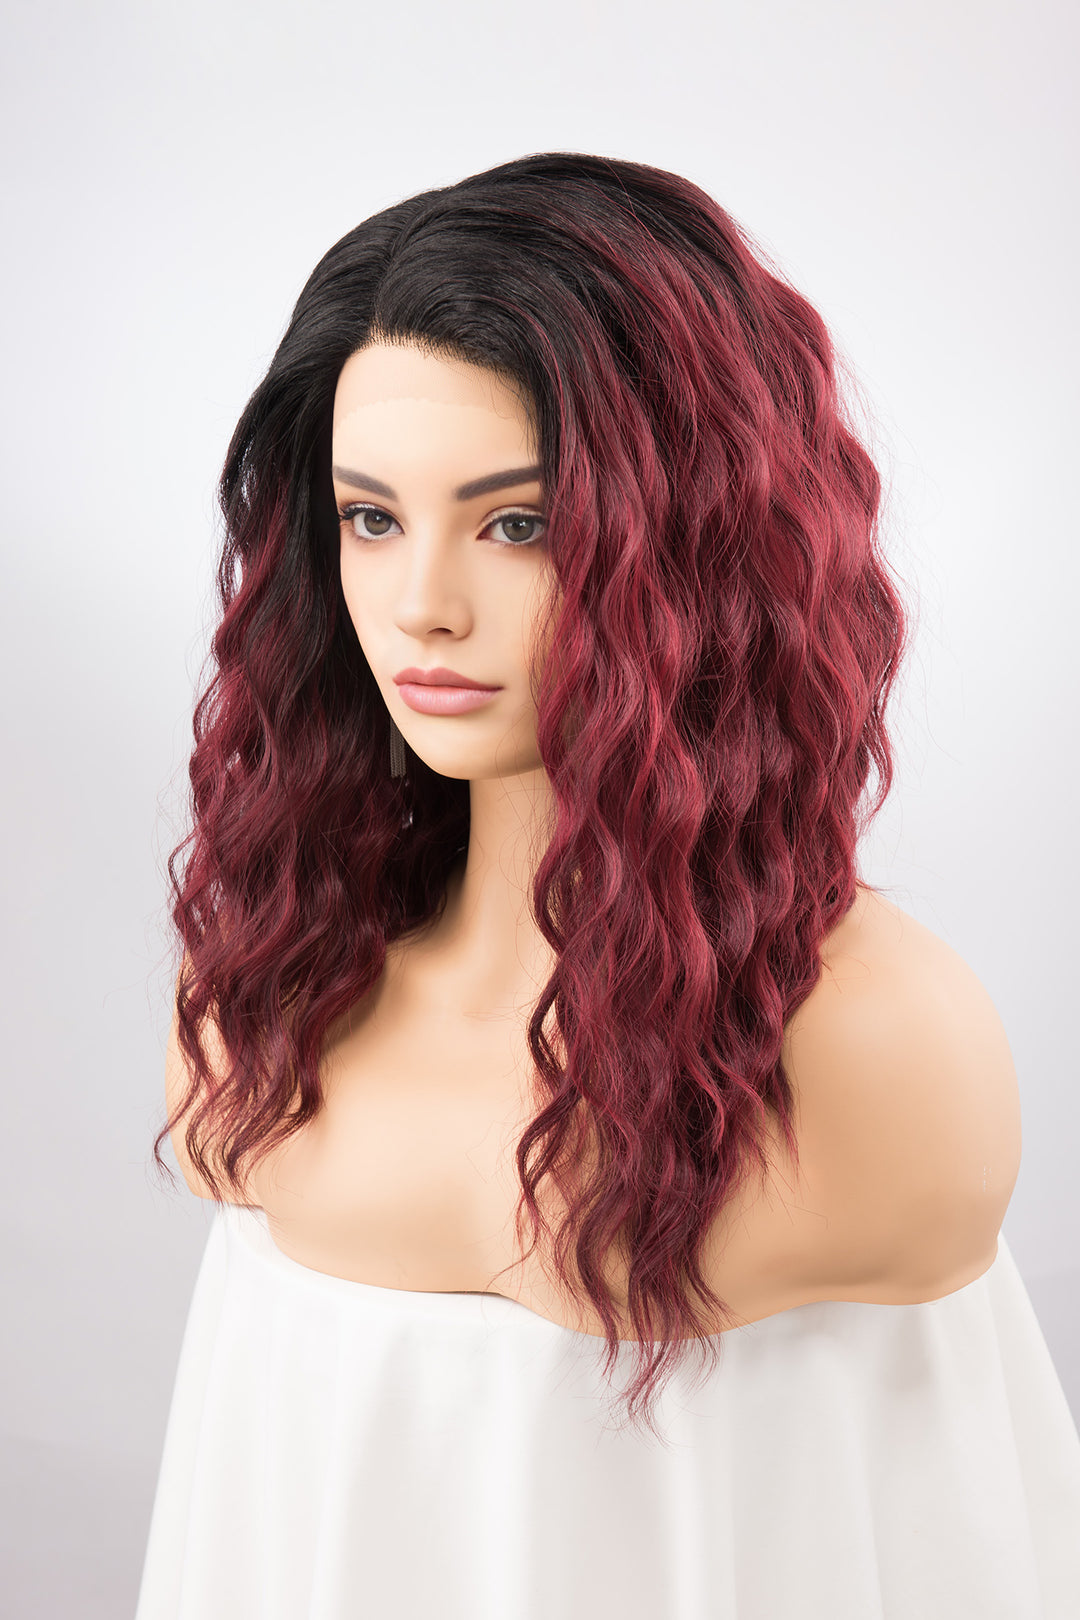 Red Lace Front Wig Burgundy Wavy Wig with Dark Roots Maroon Wig Beach Wavy Wig Cosplay Wig Halloween Costume Wig Aiden